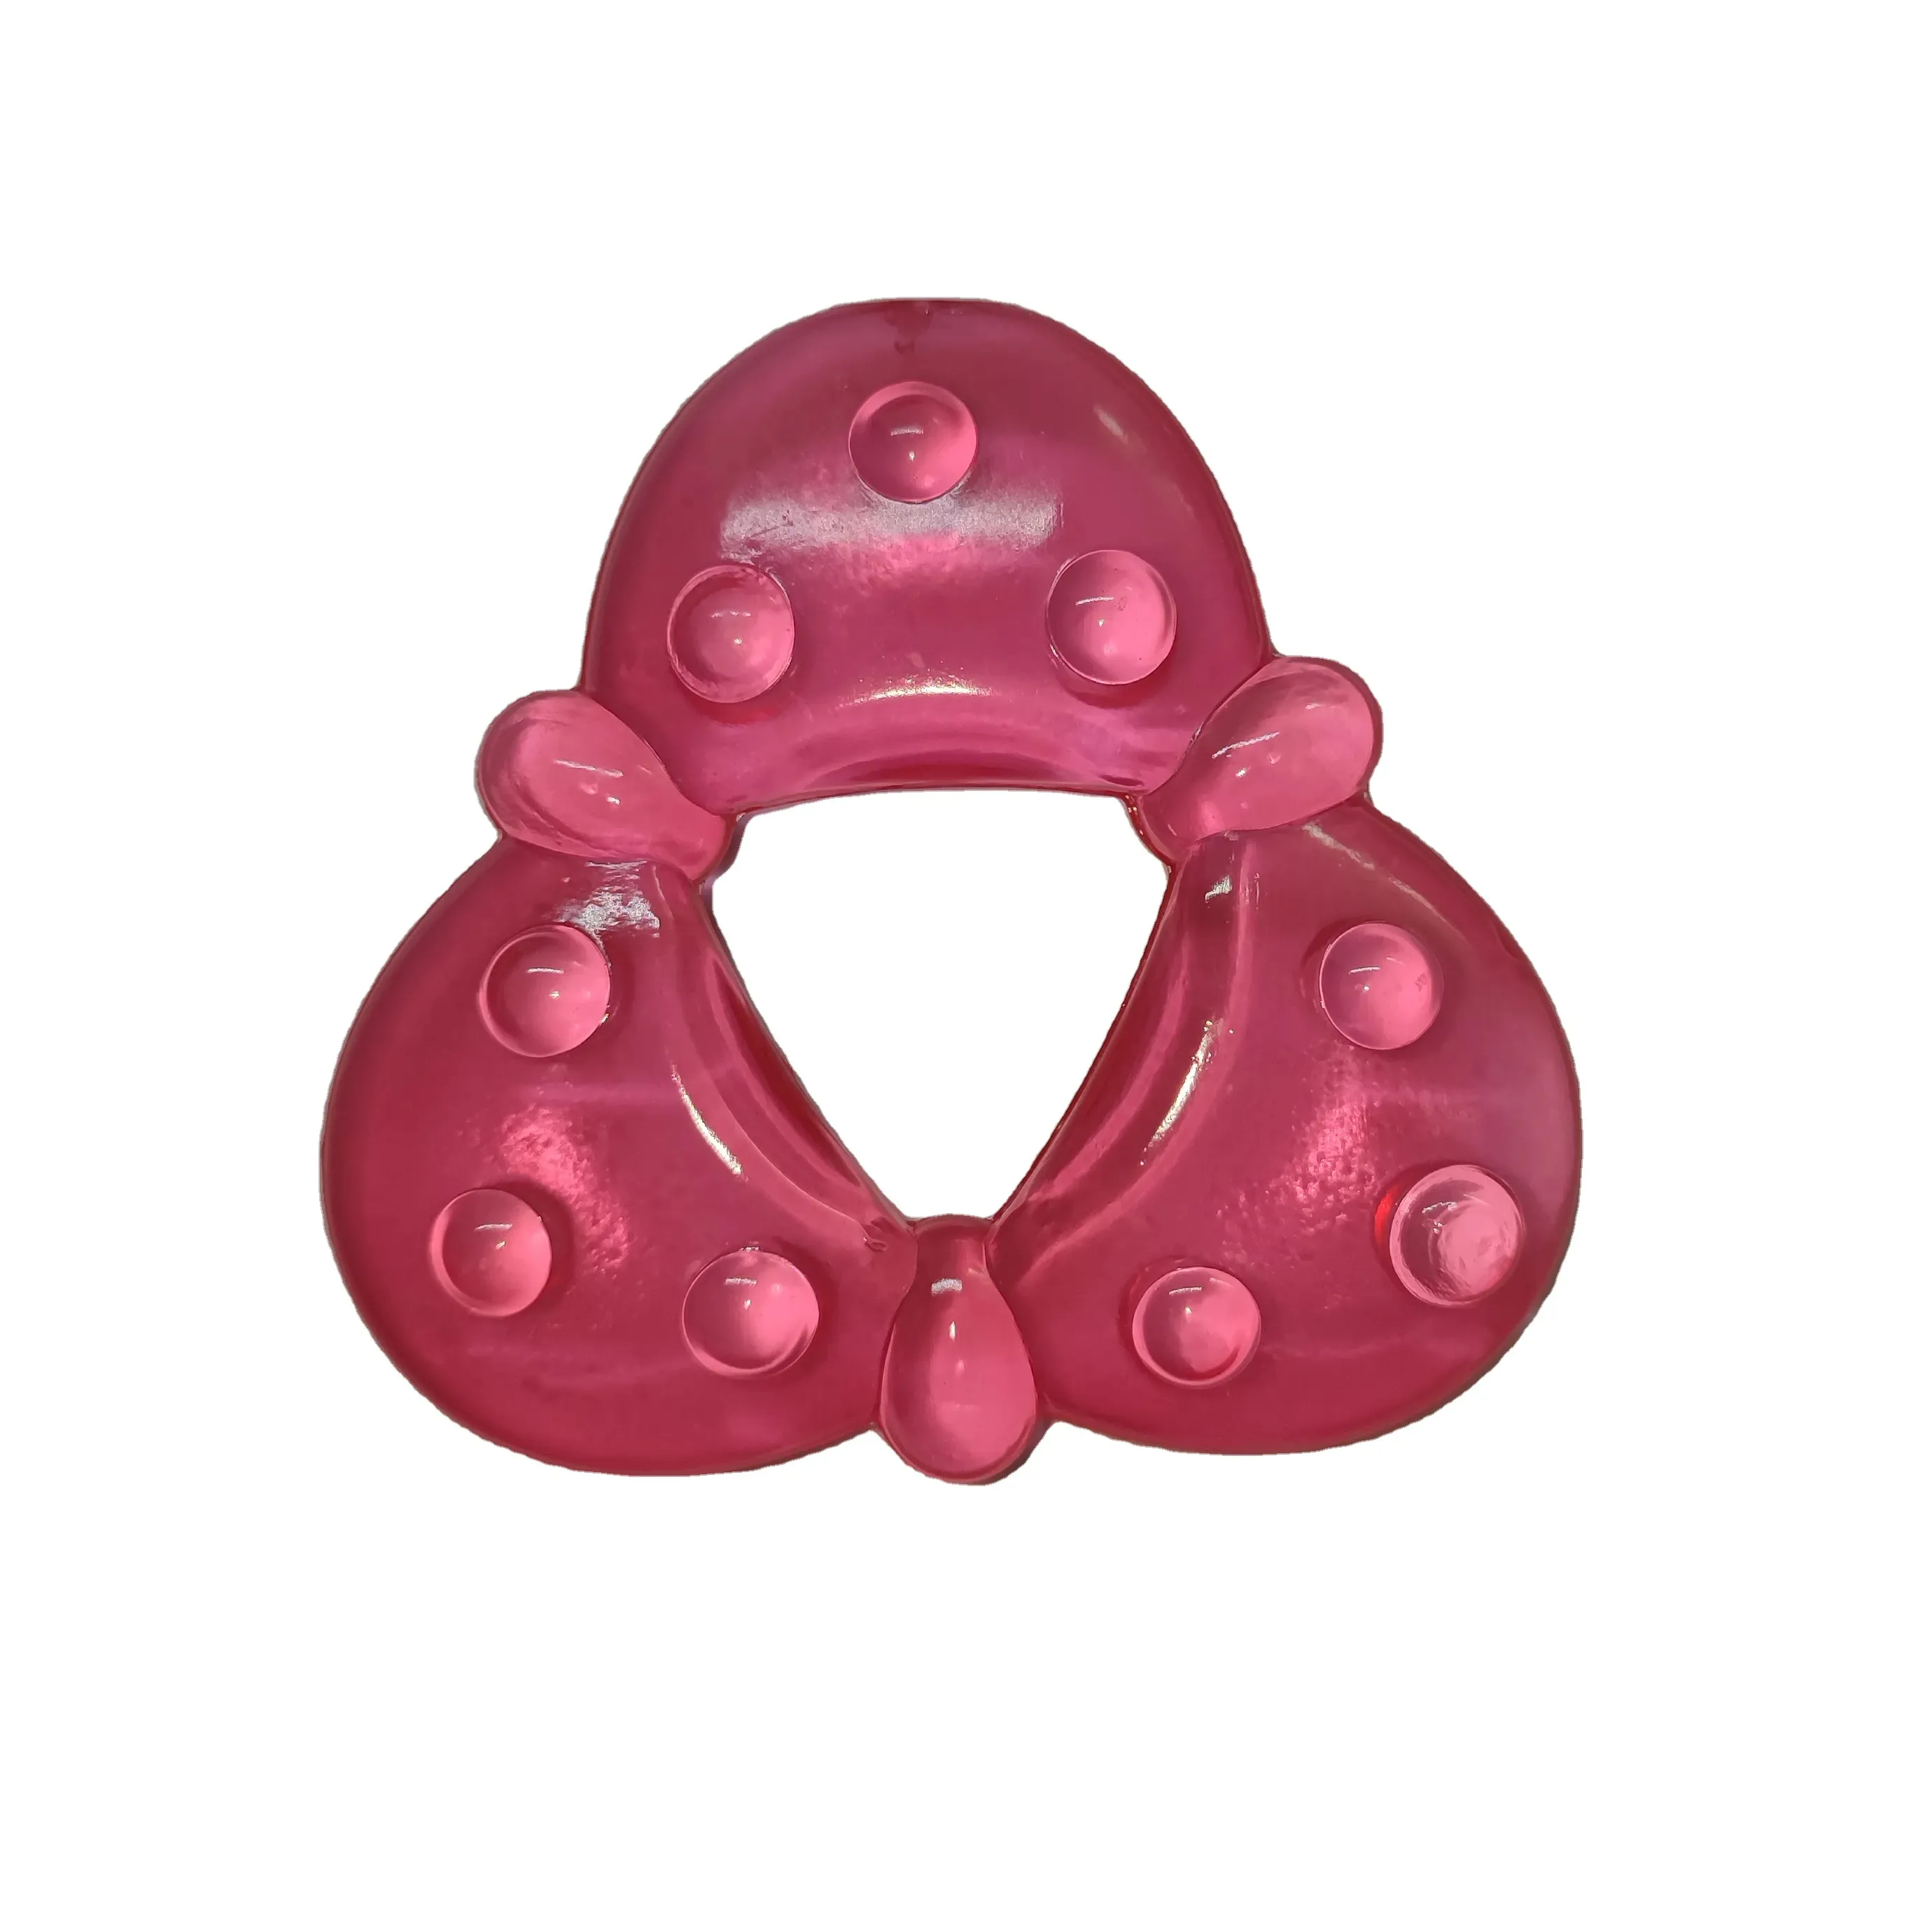 Triangle teething toy teether Baby Water Filled Teether